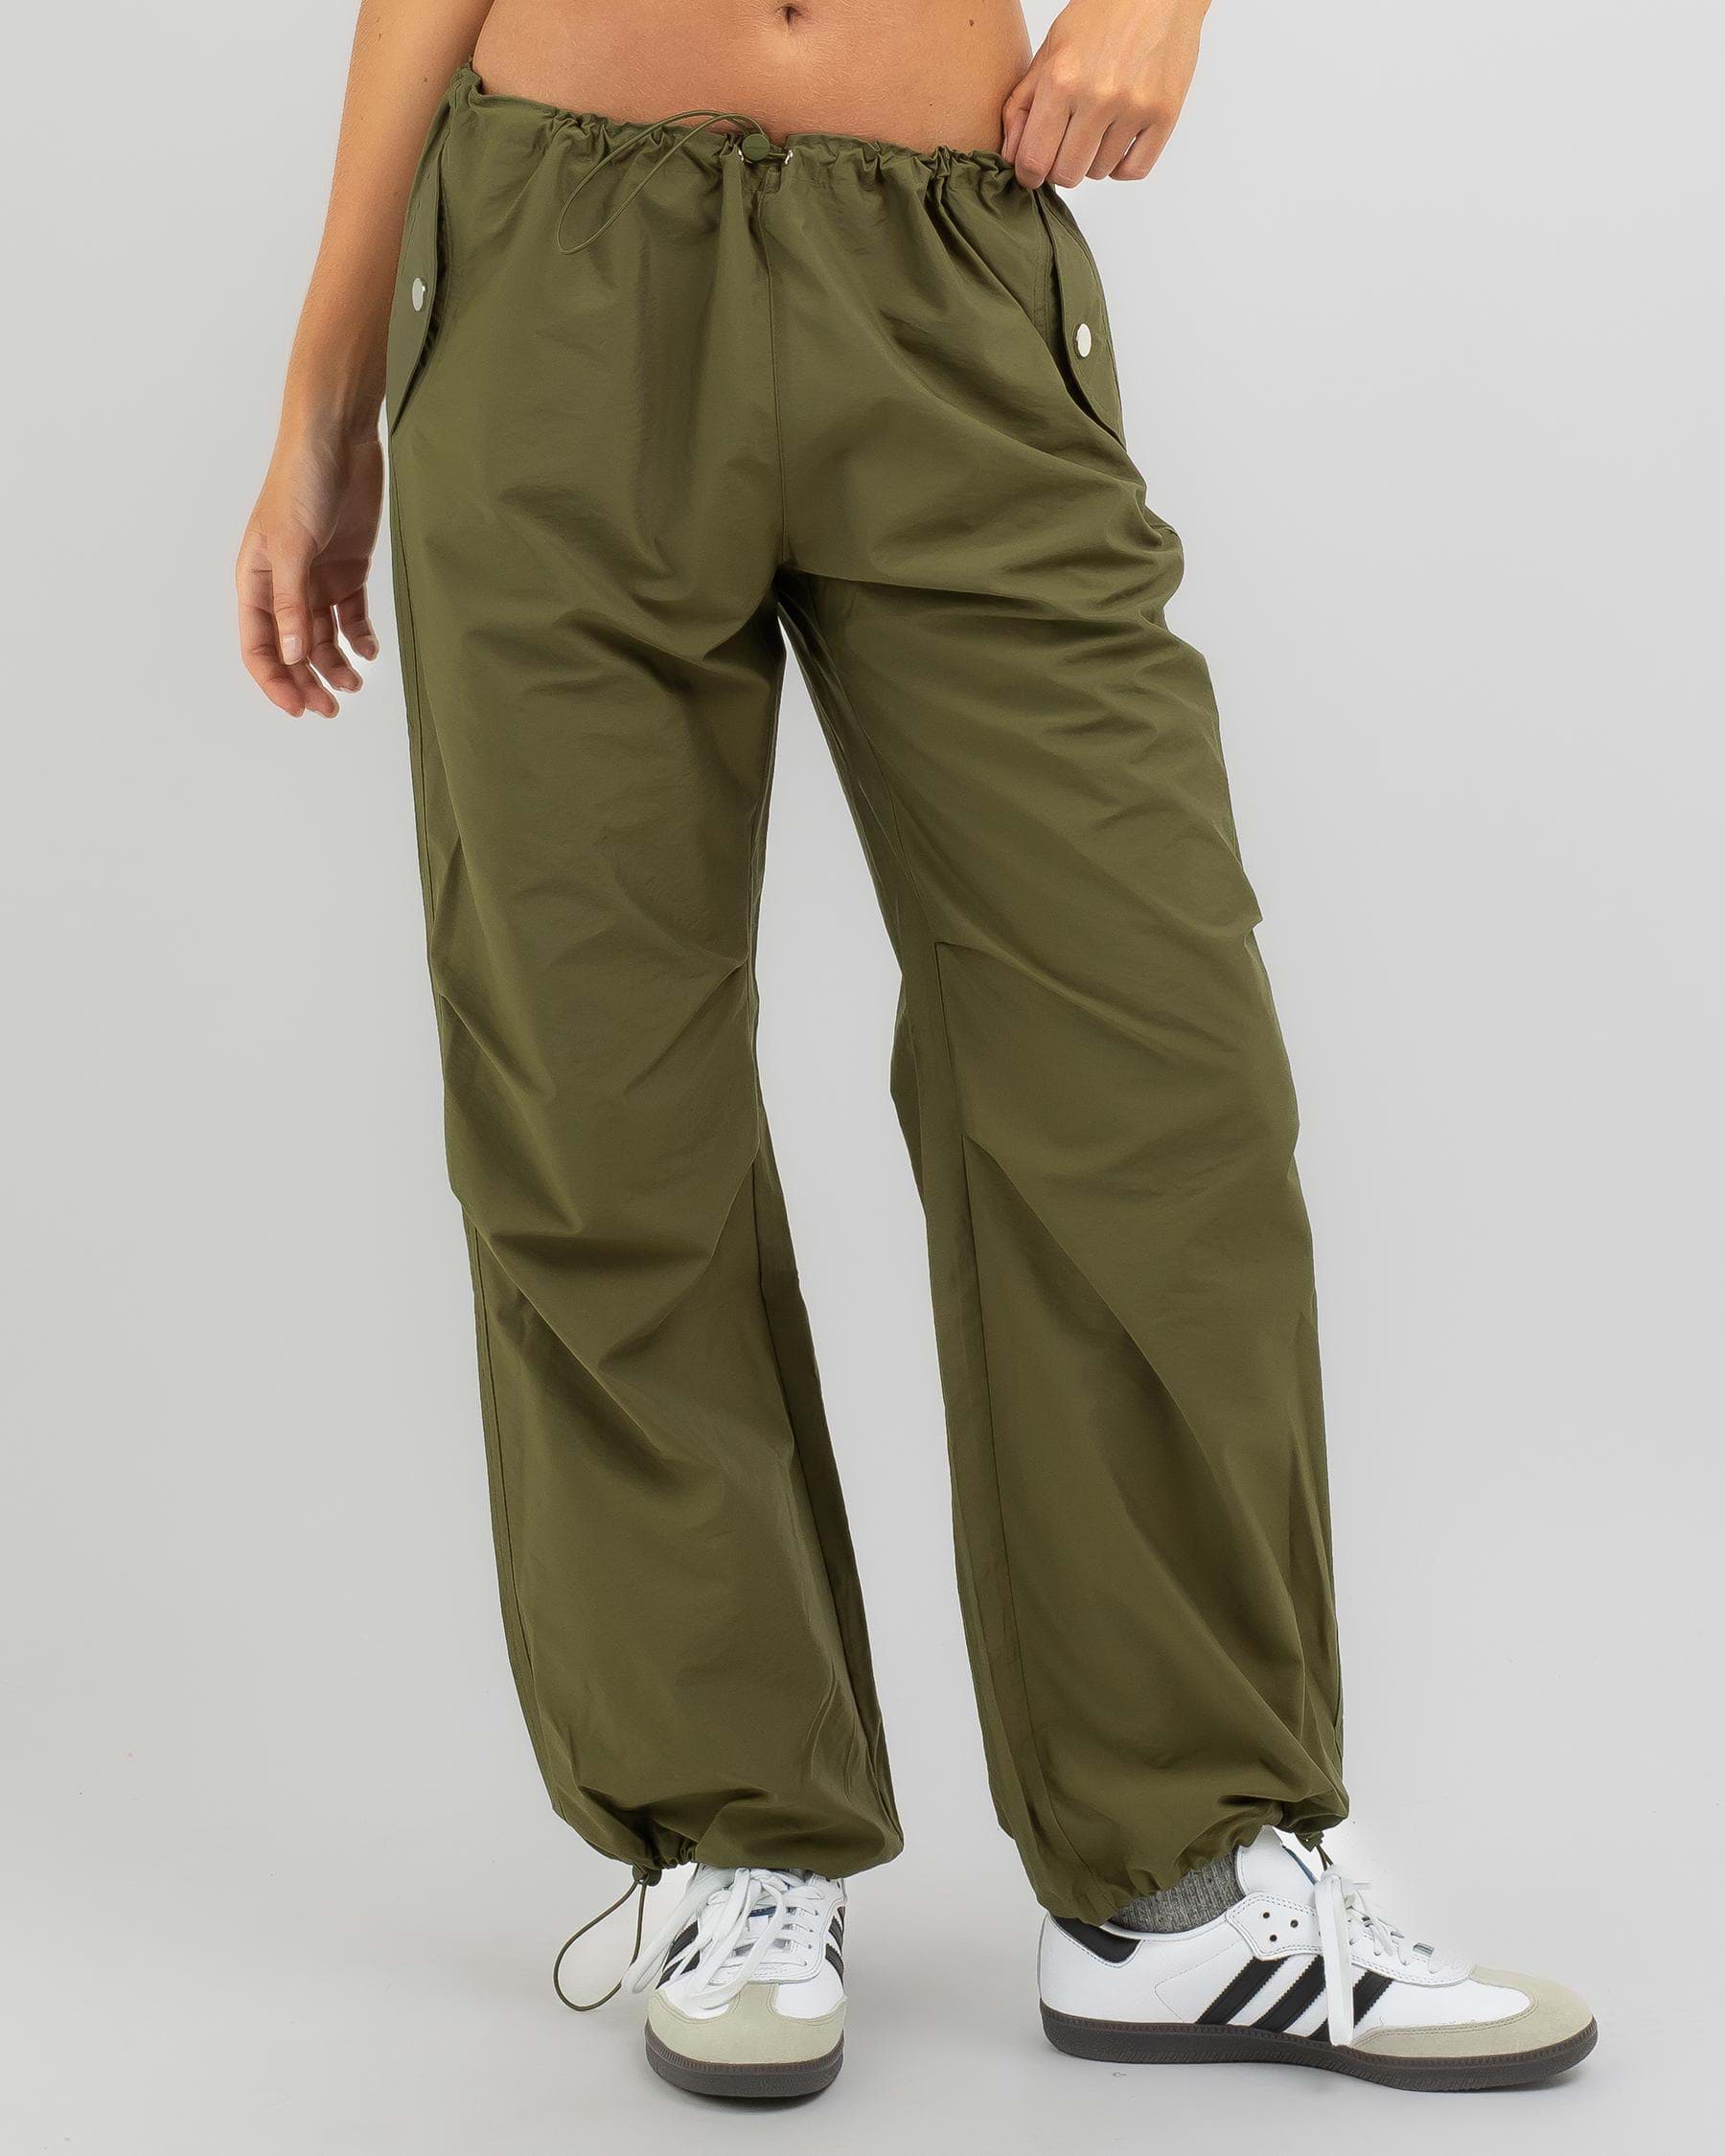 Ava And Ever Hailey Pants In Khaki - Fast Shipping & Easy Returns ...